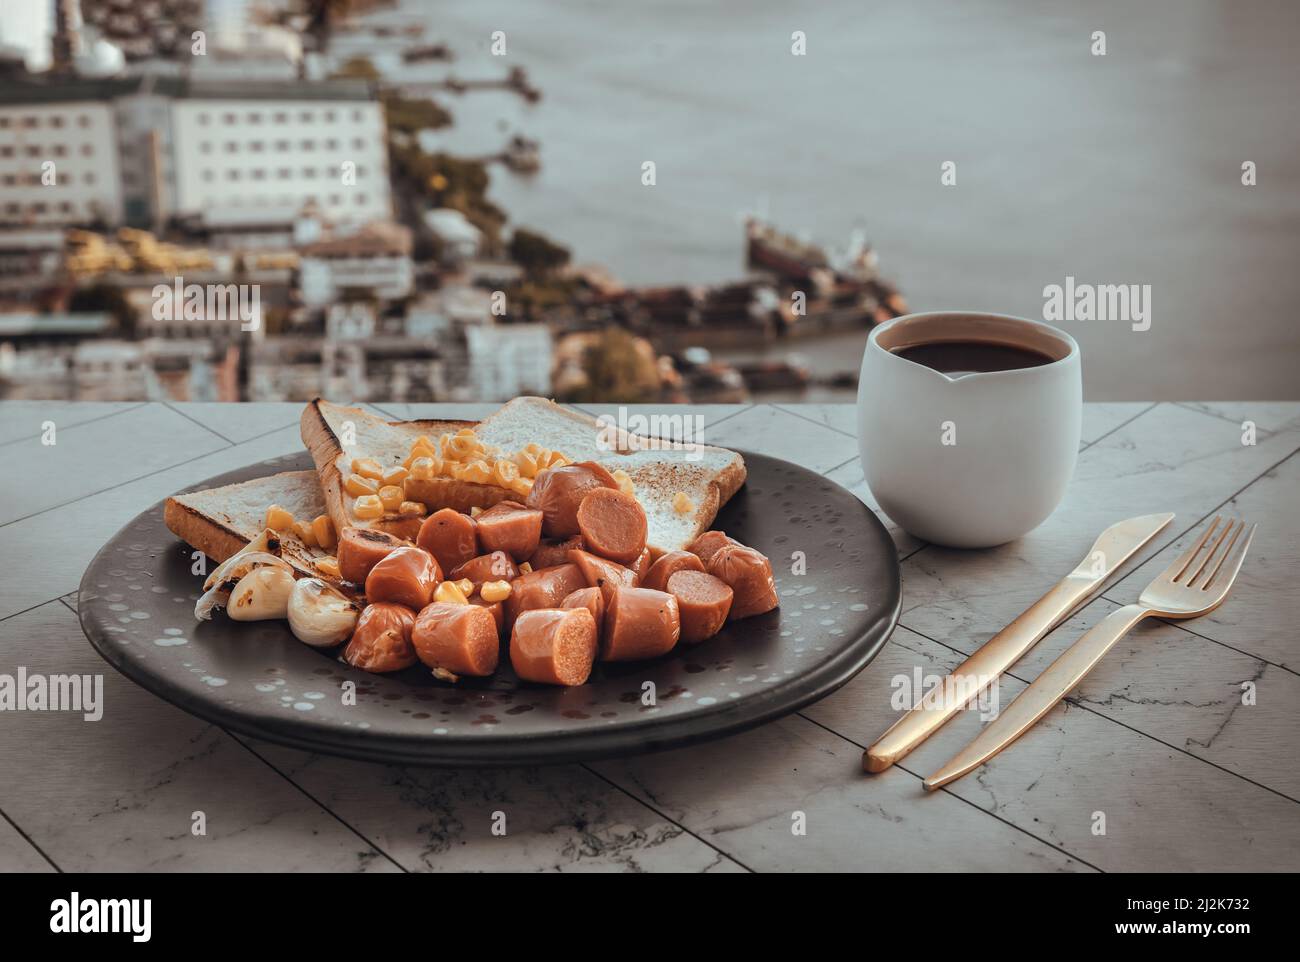 Breakfast with Fried sausages, Breads, Sweet corn kernels and Garlic on Black ceramic plate served with Cup of Black coffee. Selective focuse. Stock Photo